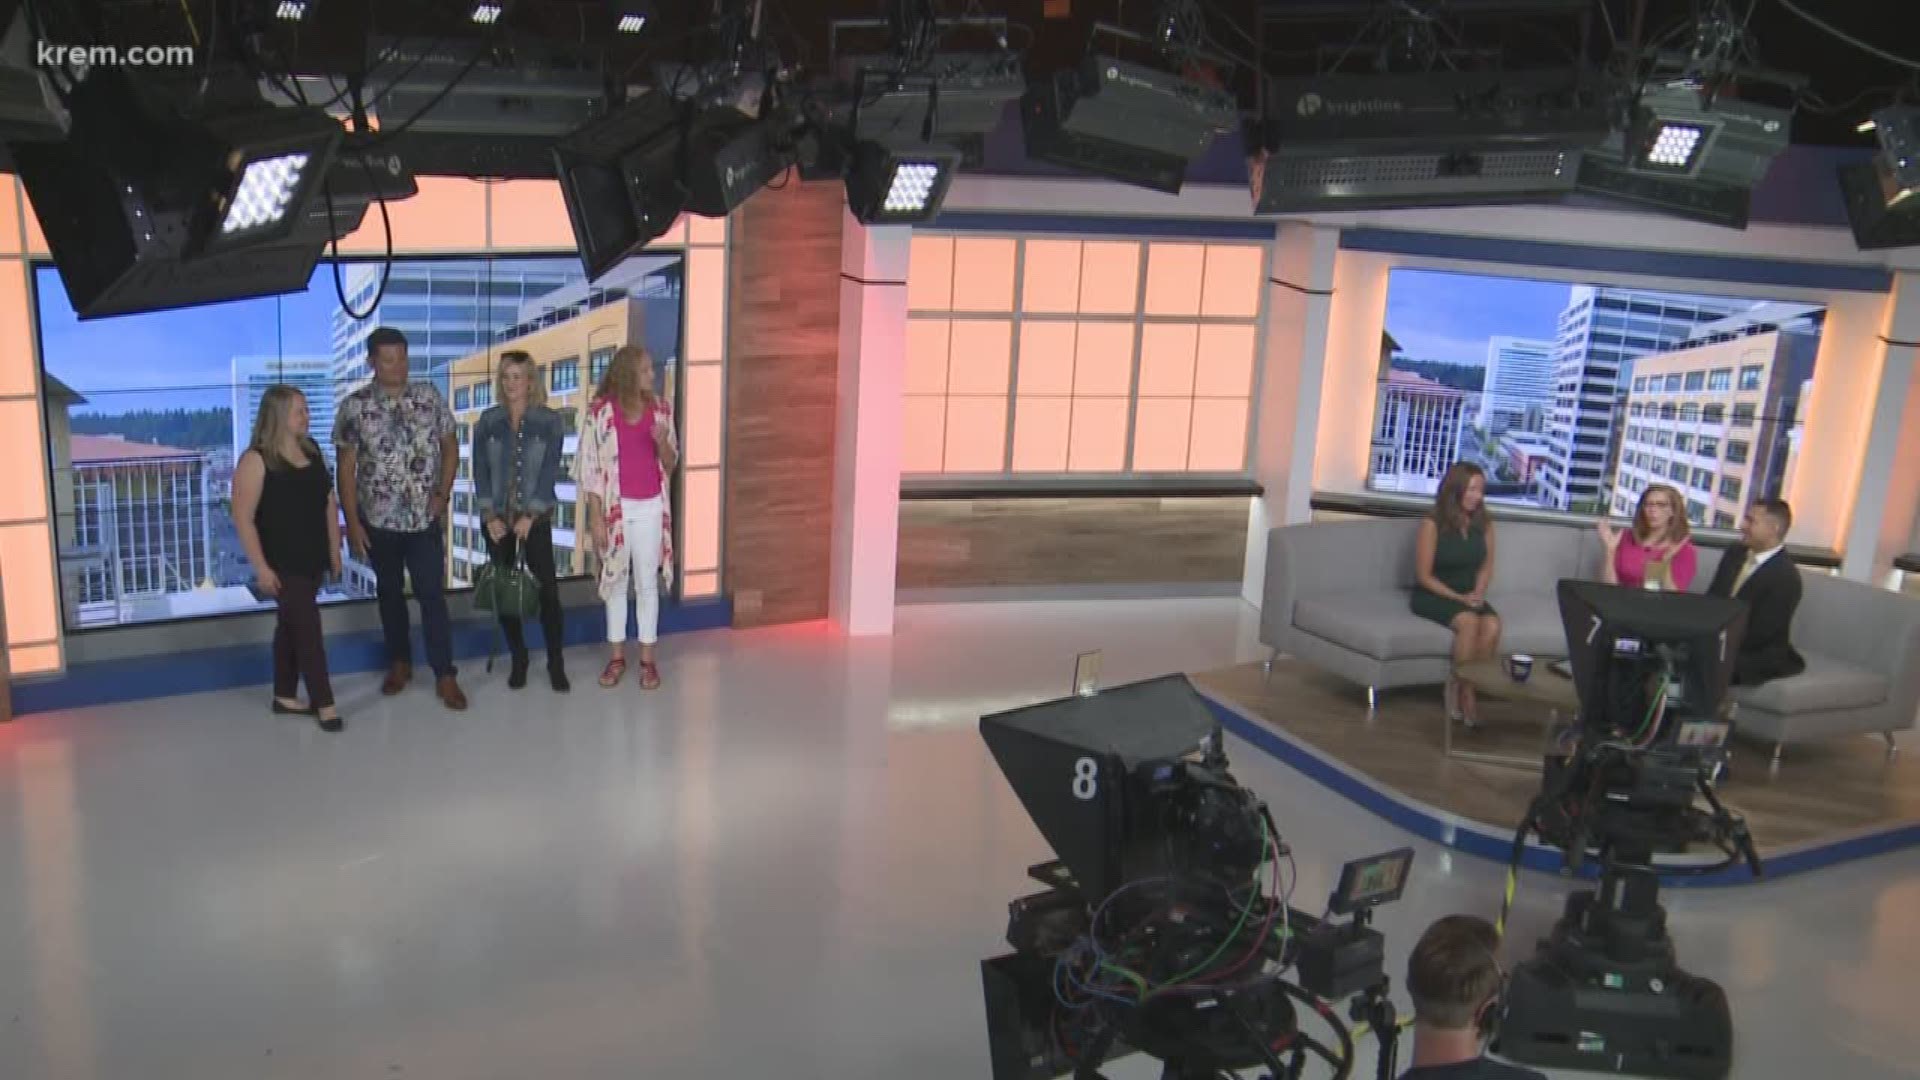 KREM's Jen York and Evan Noorani take a look at some hot travel fashion with Macy's style expert Nicole Risinger.